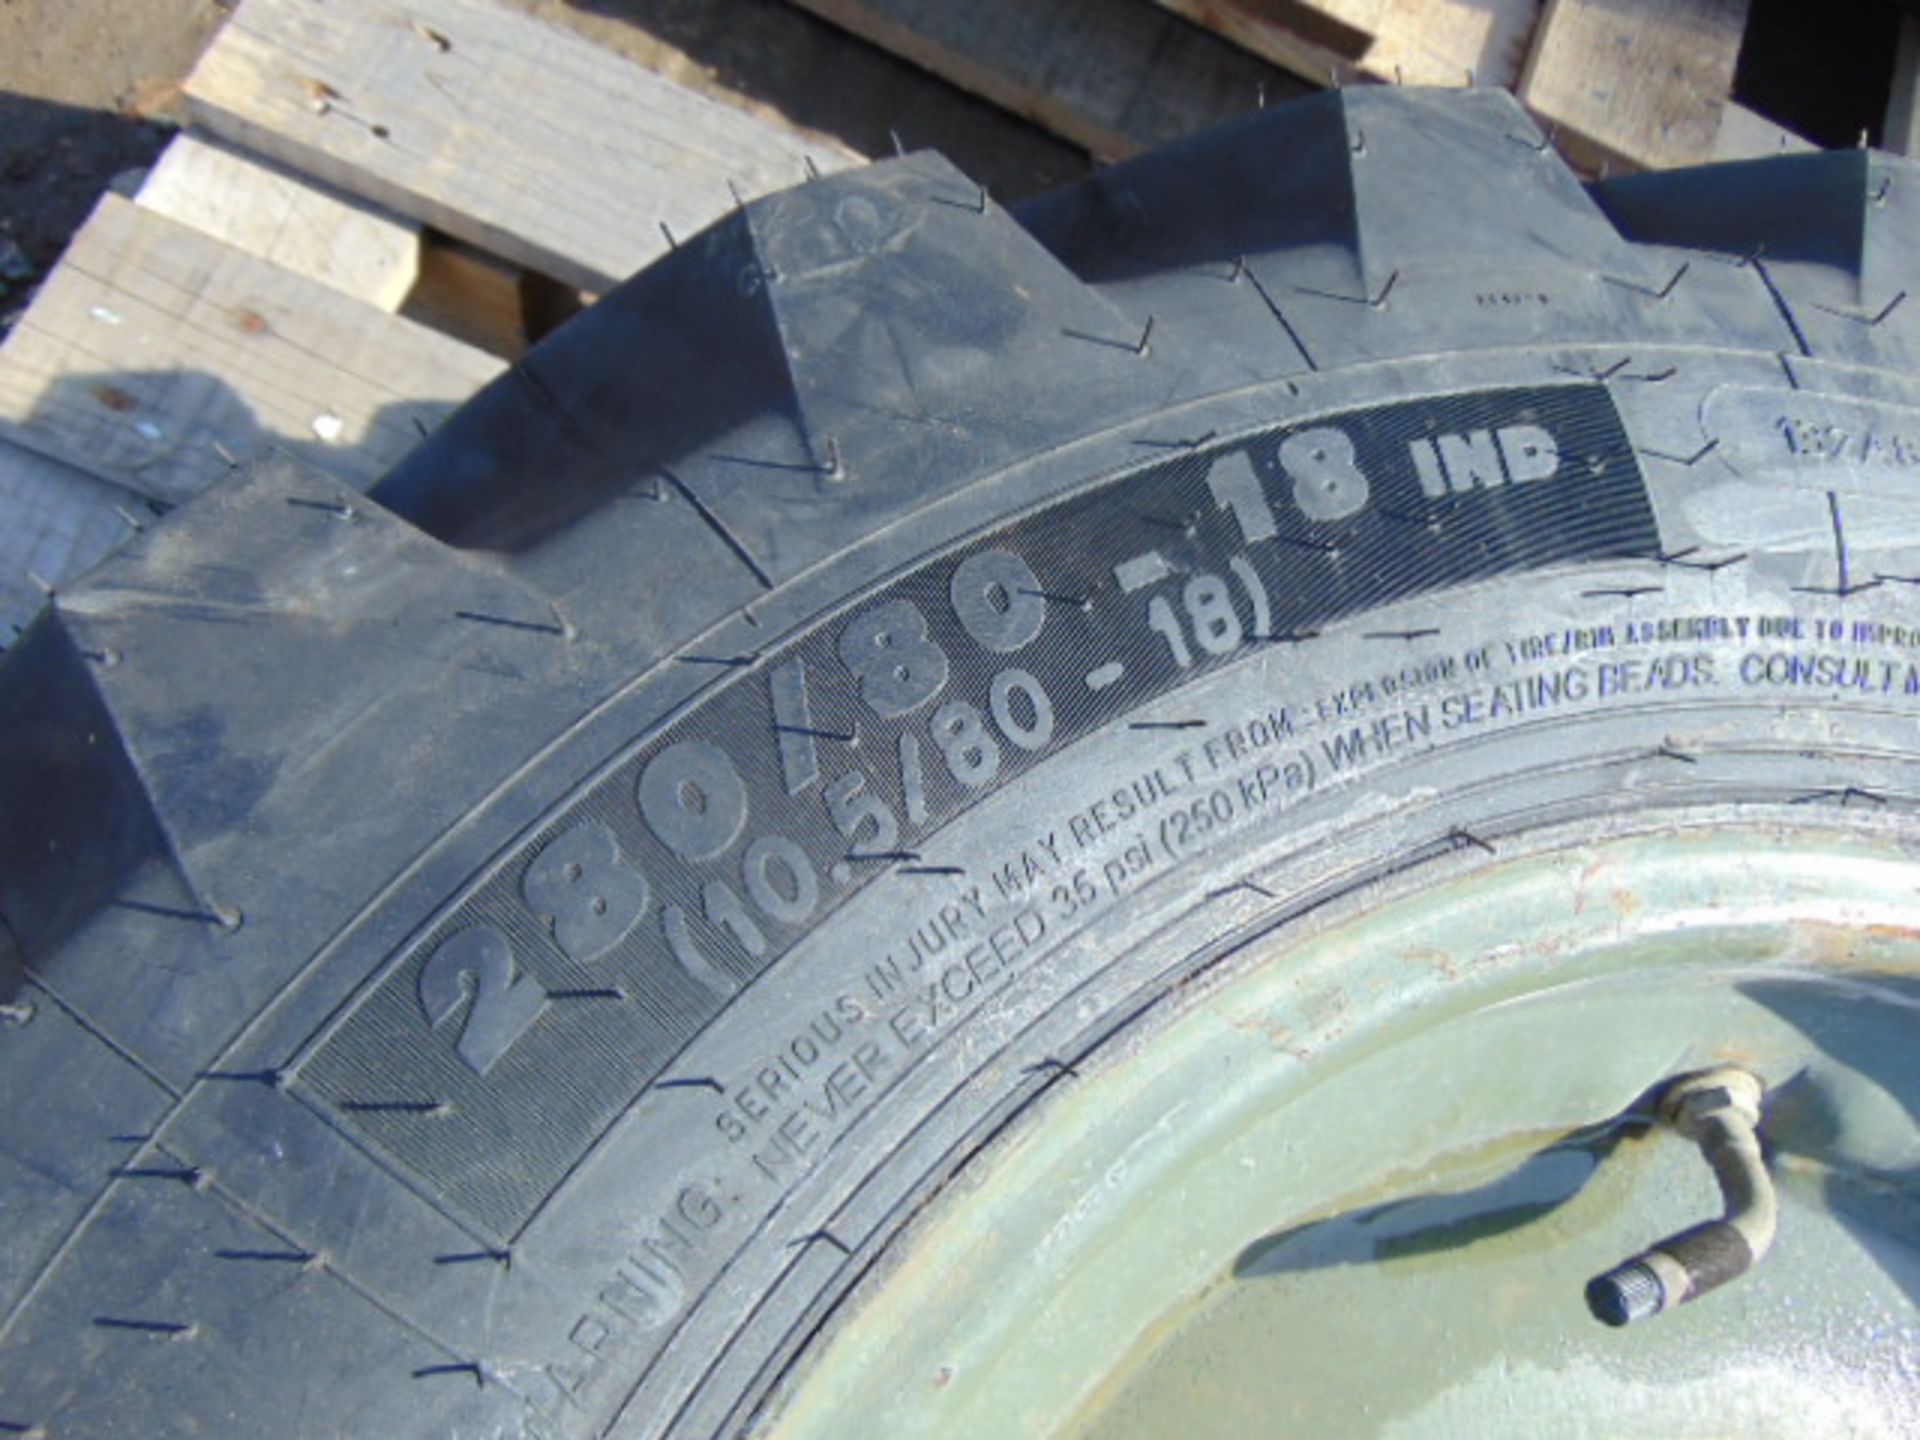 1 x Michelin Power CL 280/80-18 IND Tyre with 4 Stud Rim - Image 8 of 8